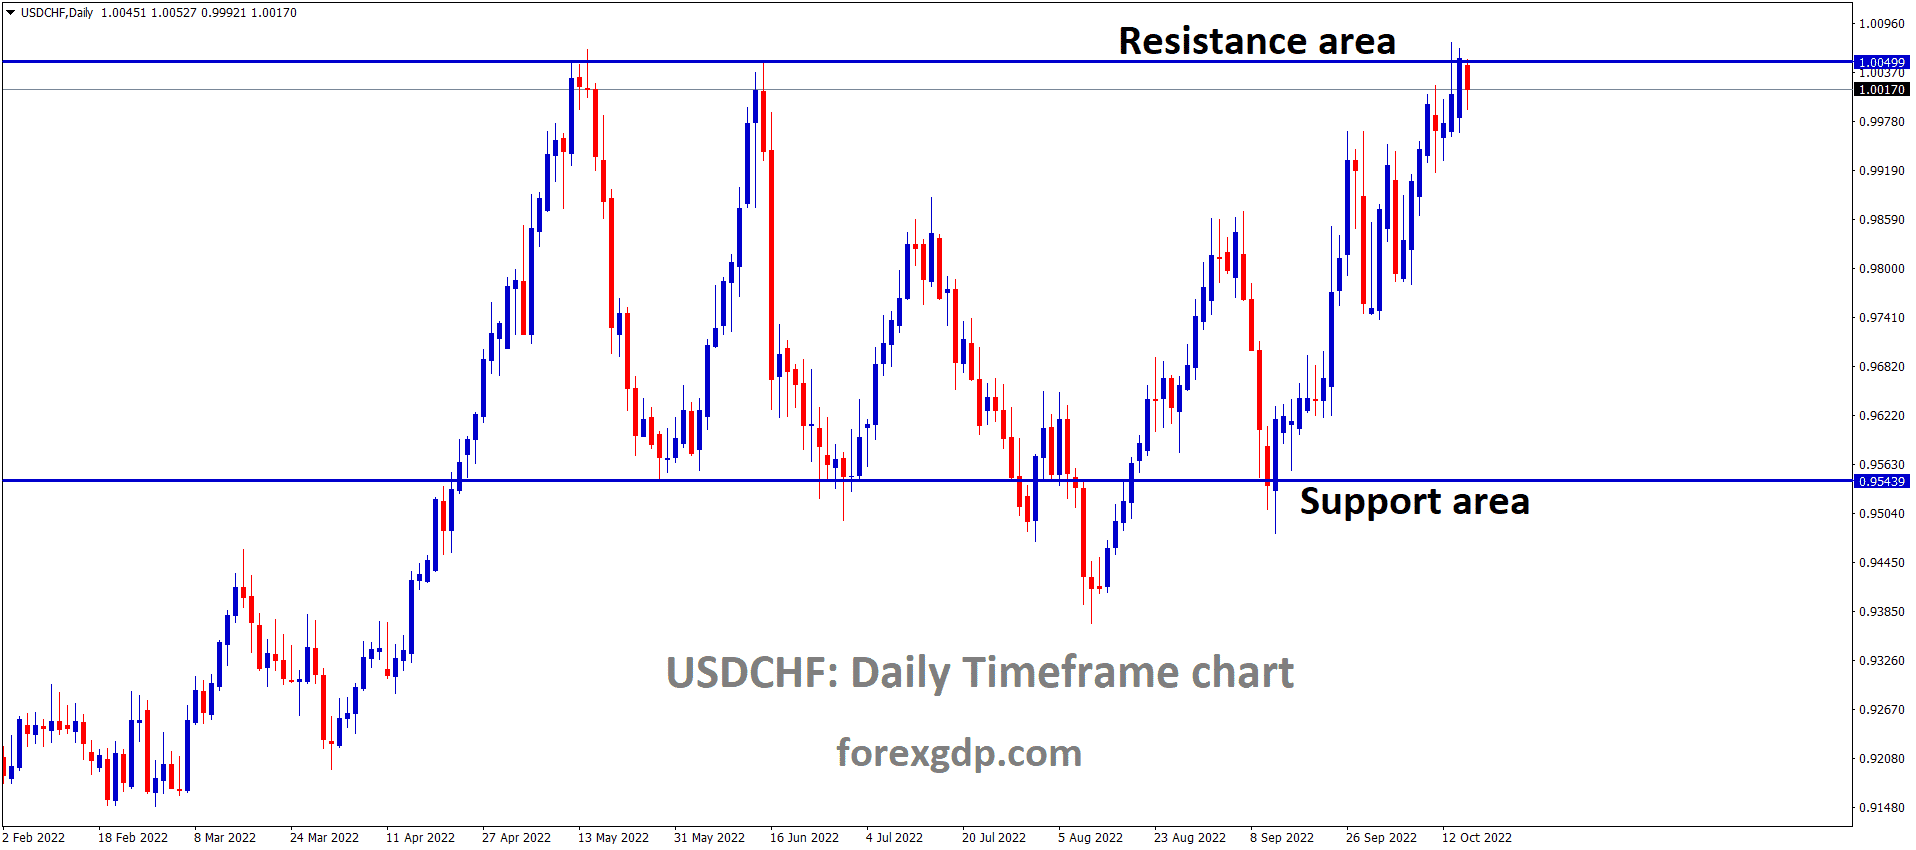 USDCHF is moving in the Box Pattern and the market has reached the resistance area of the pattern 2